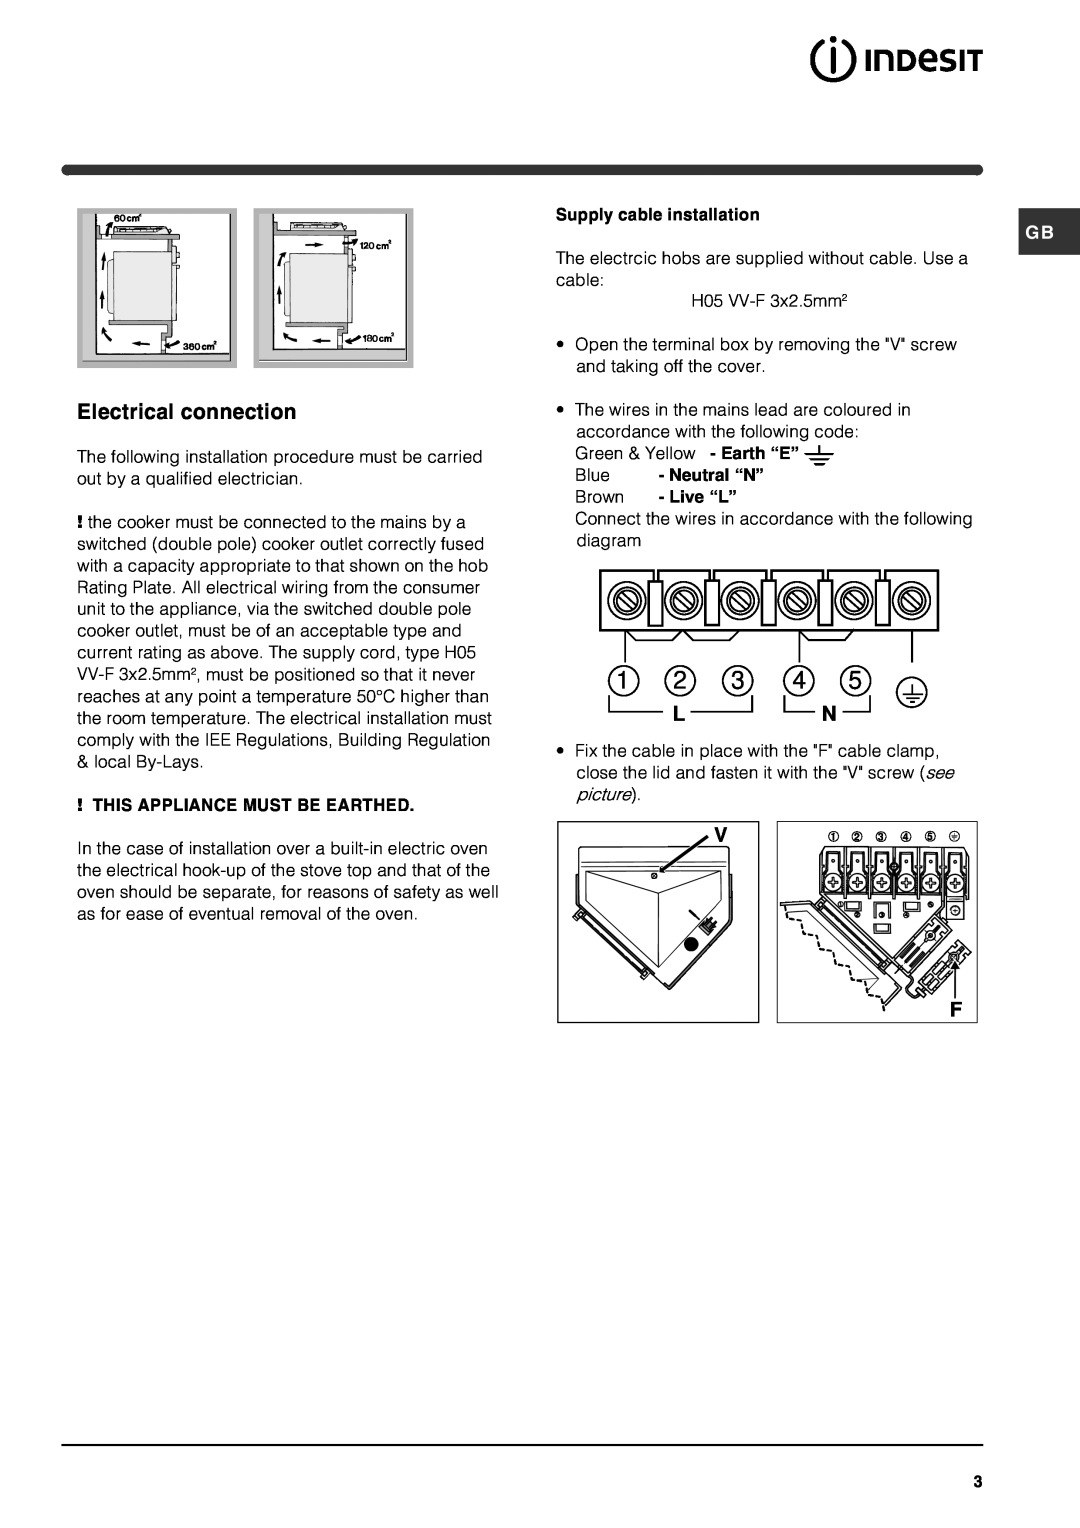 Indesit PI604GB operating instructions Electrical connection 